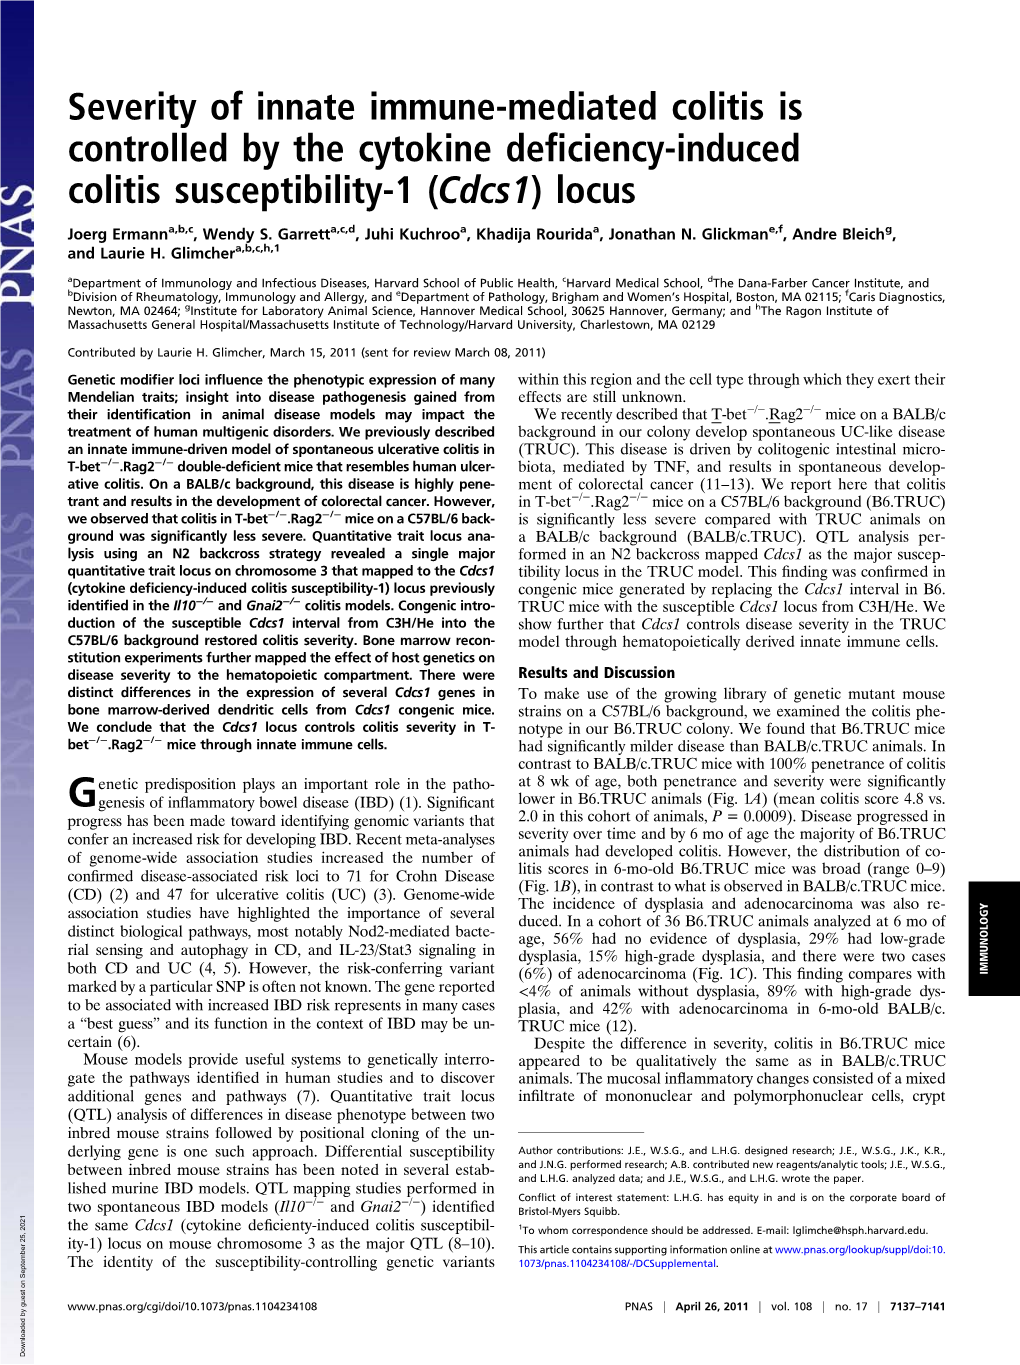 Severity of Innate Immune-Mediated Colitis Is Controlled by the Cytokine Deﬁciency-Induced Colitis Susceptibility-1 (Cdcs1) Locus